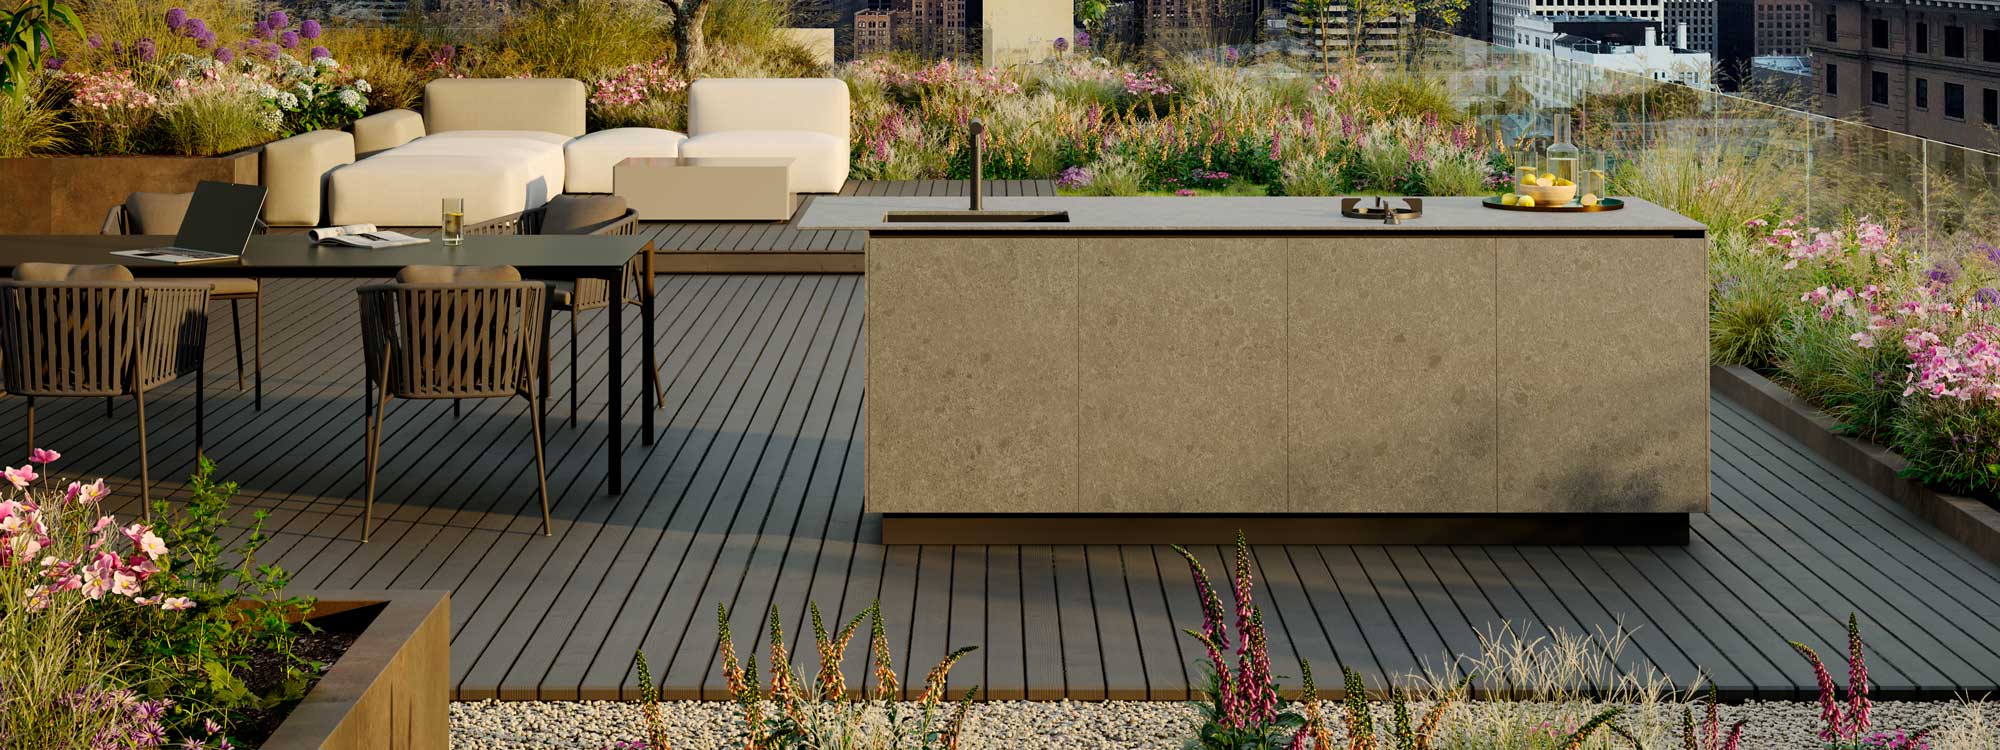 Image of rooftop terrace with OiCook outdoor kitchen island and Twist table and dining chairs, with Elements garden sofa in background, surrounded by flowerbeds